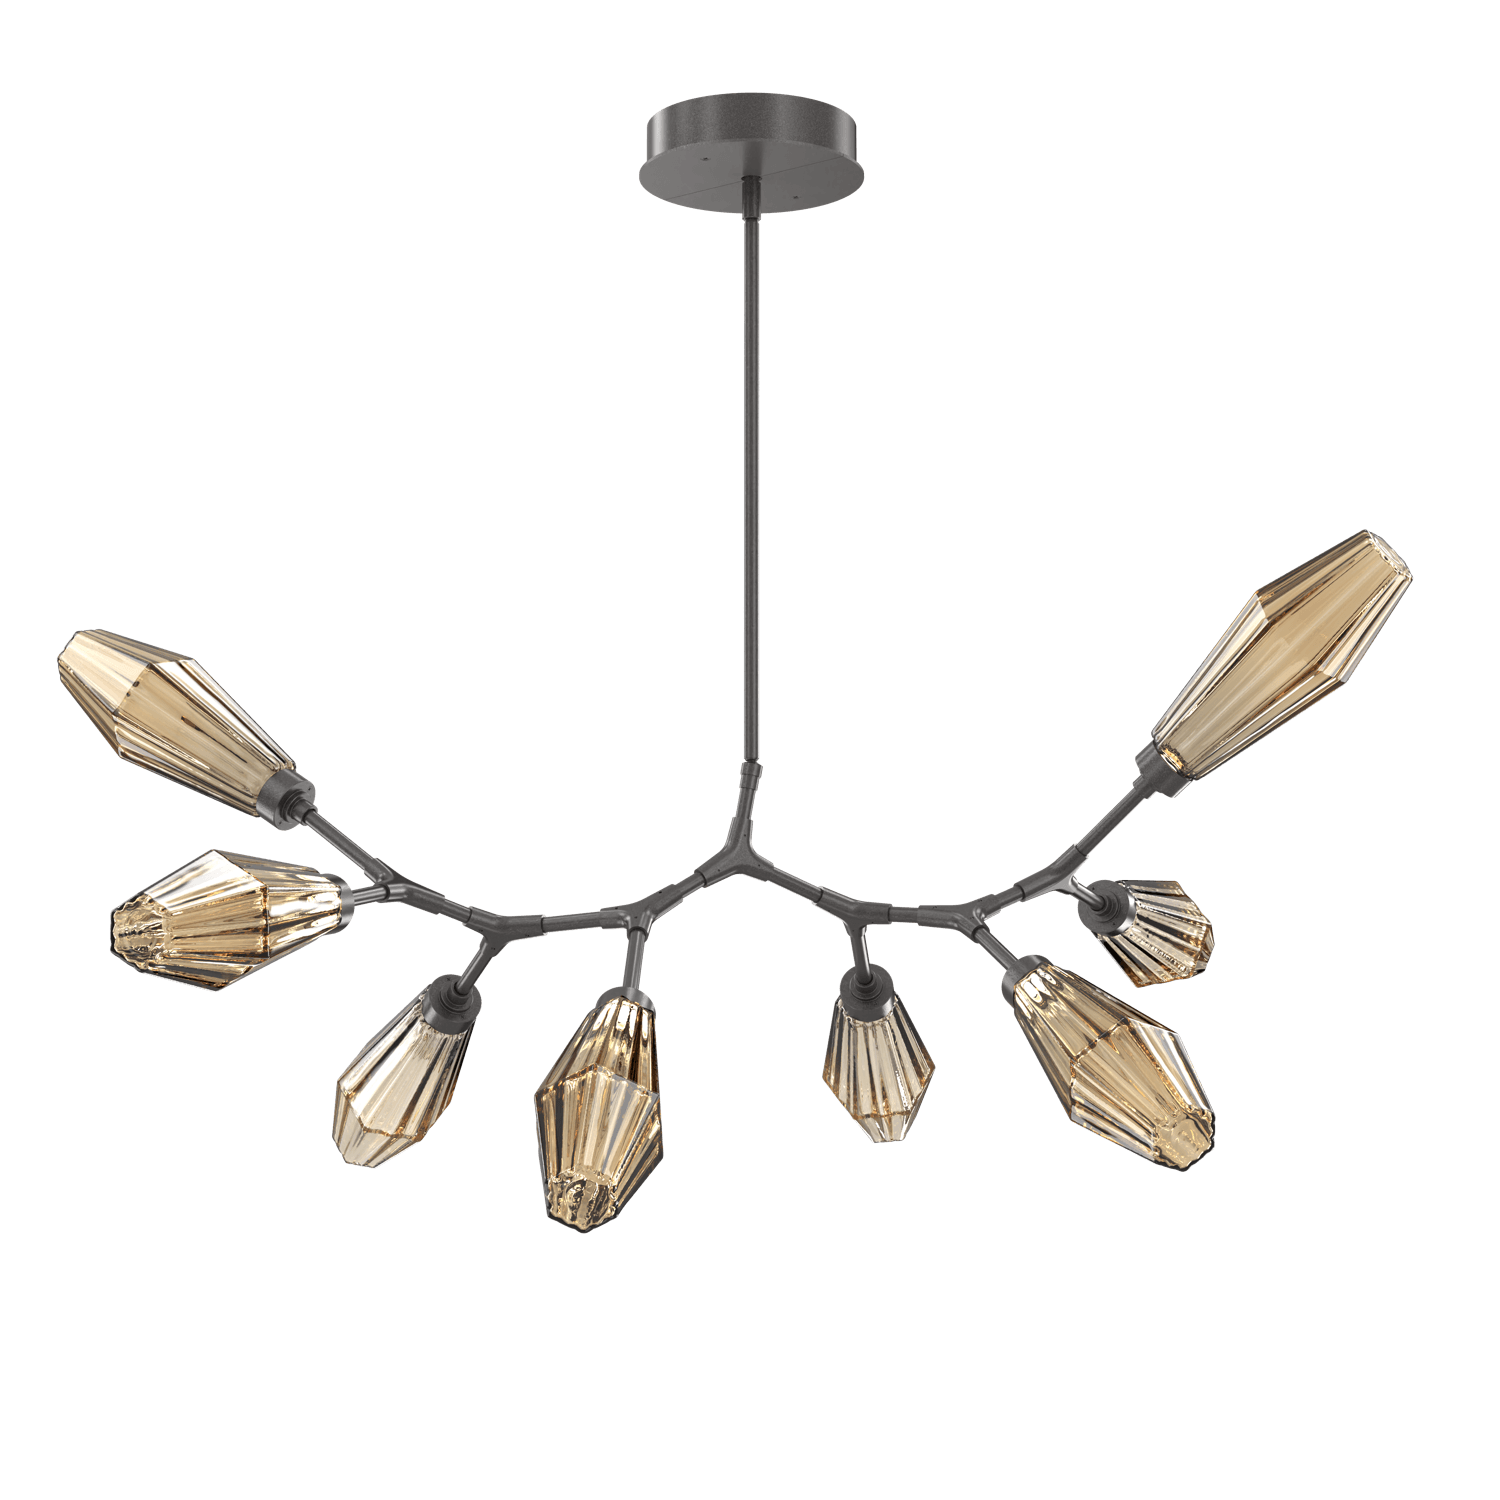 PLB0049-BB-GP-RB-Hammerton-Studio-Aalto-8-light-modern-branch-chandelier-with-graphite-finish-and-optic-ribbed-bronze-glass-shades-and-LED-lamping